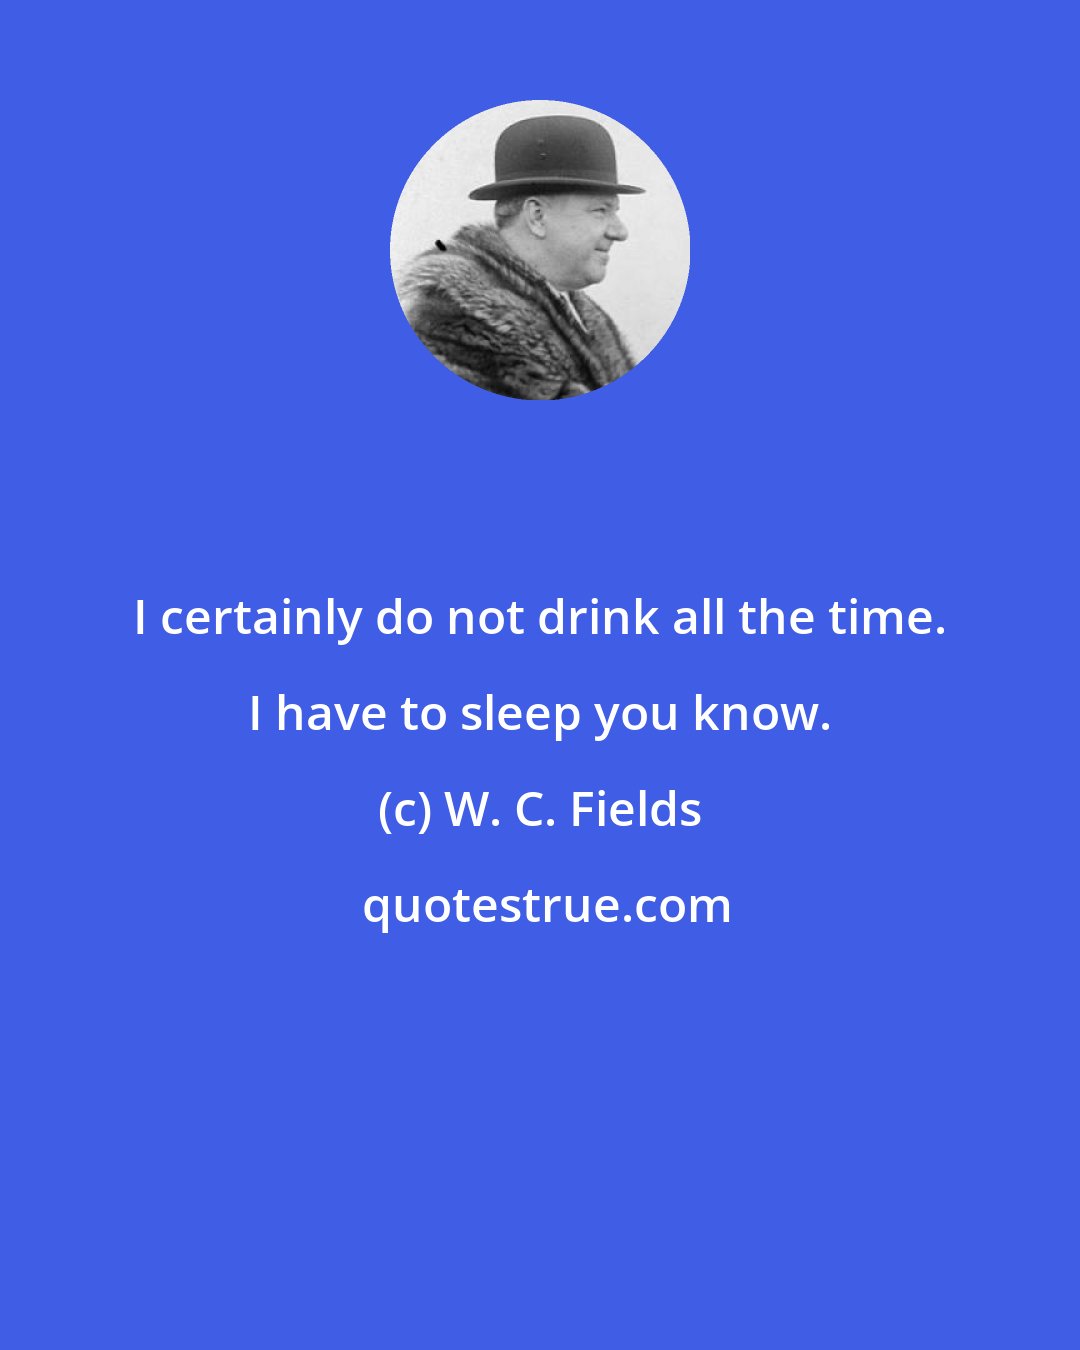 W. C. Fields: I certainly do not drink all the time. I have to sleep you know.